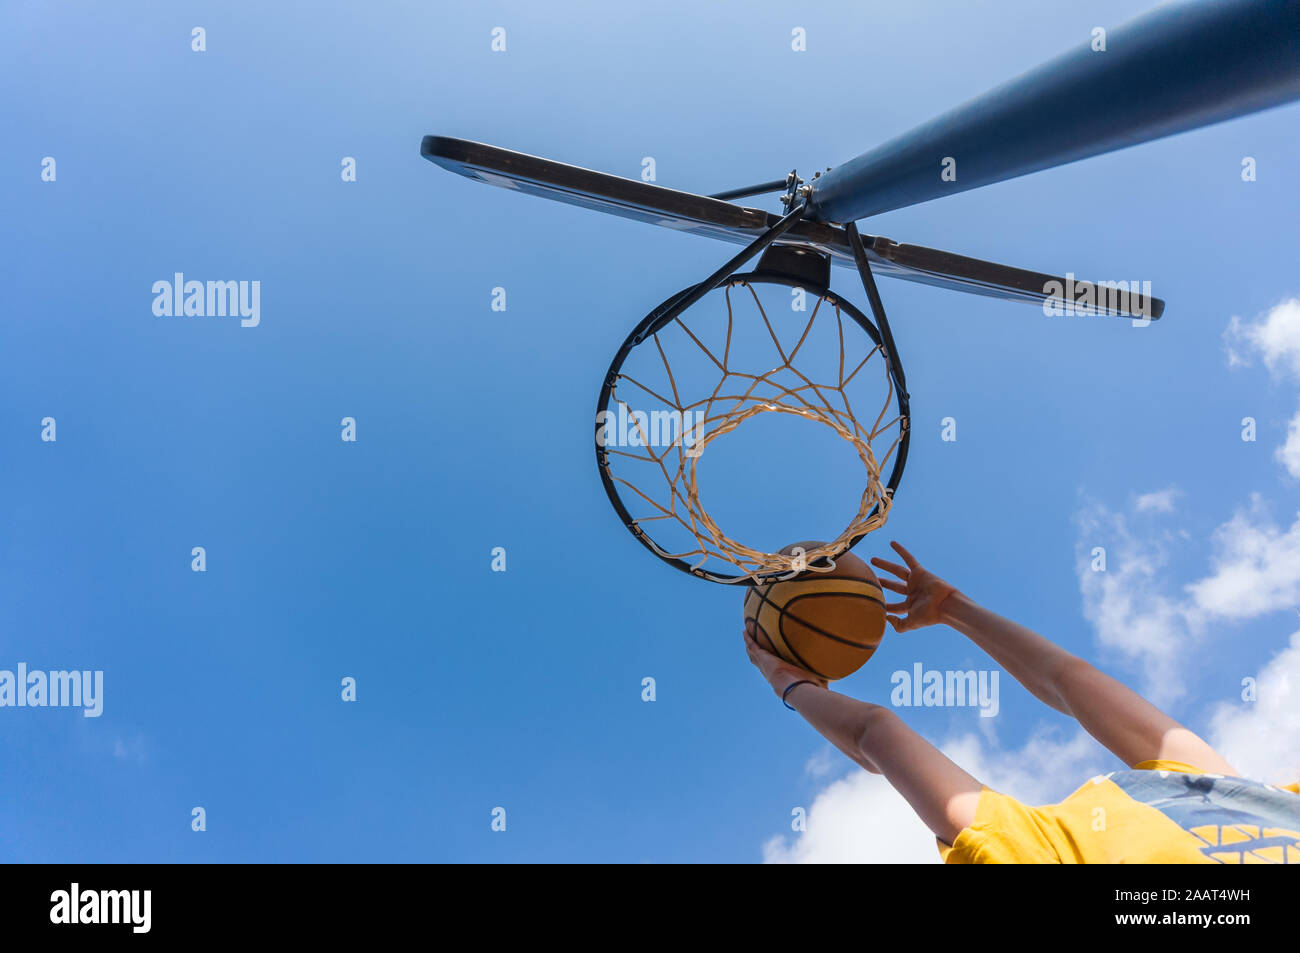 Slam dunk in basketball outdoors with blue sky Stock Photo